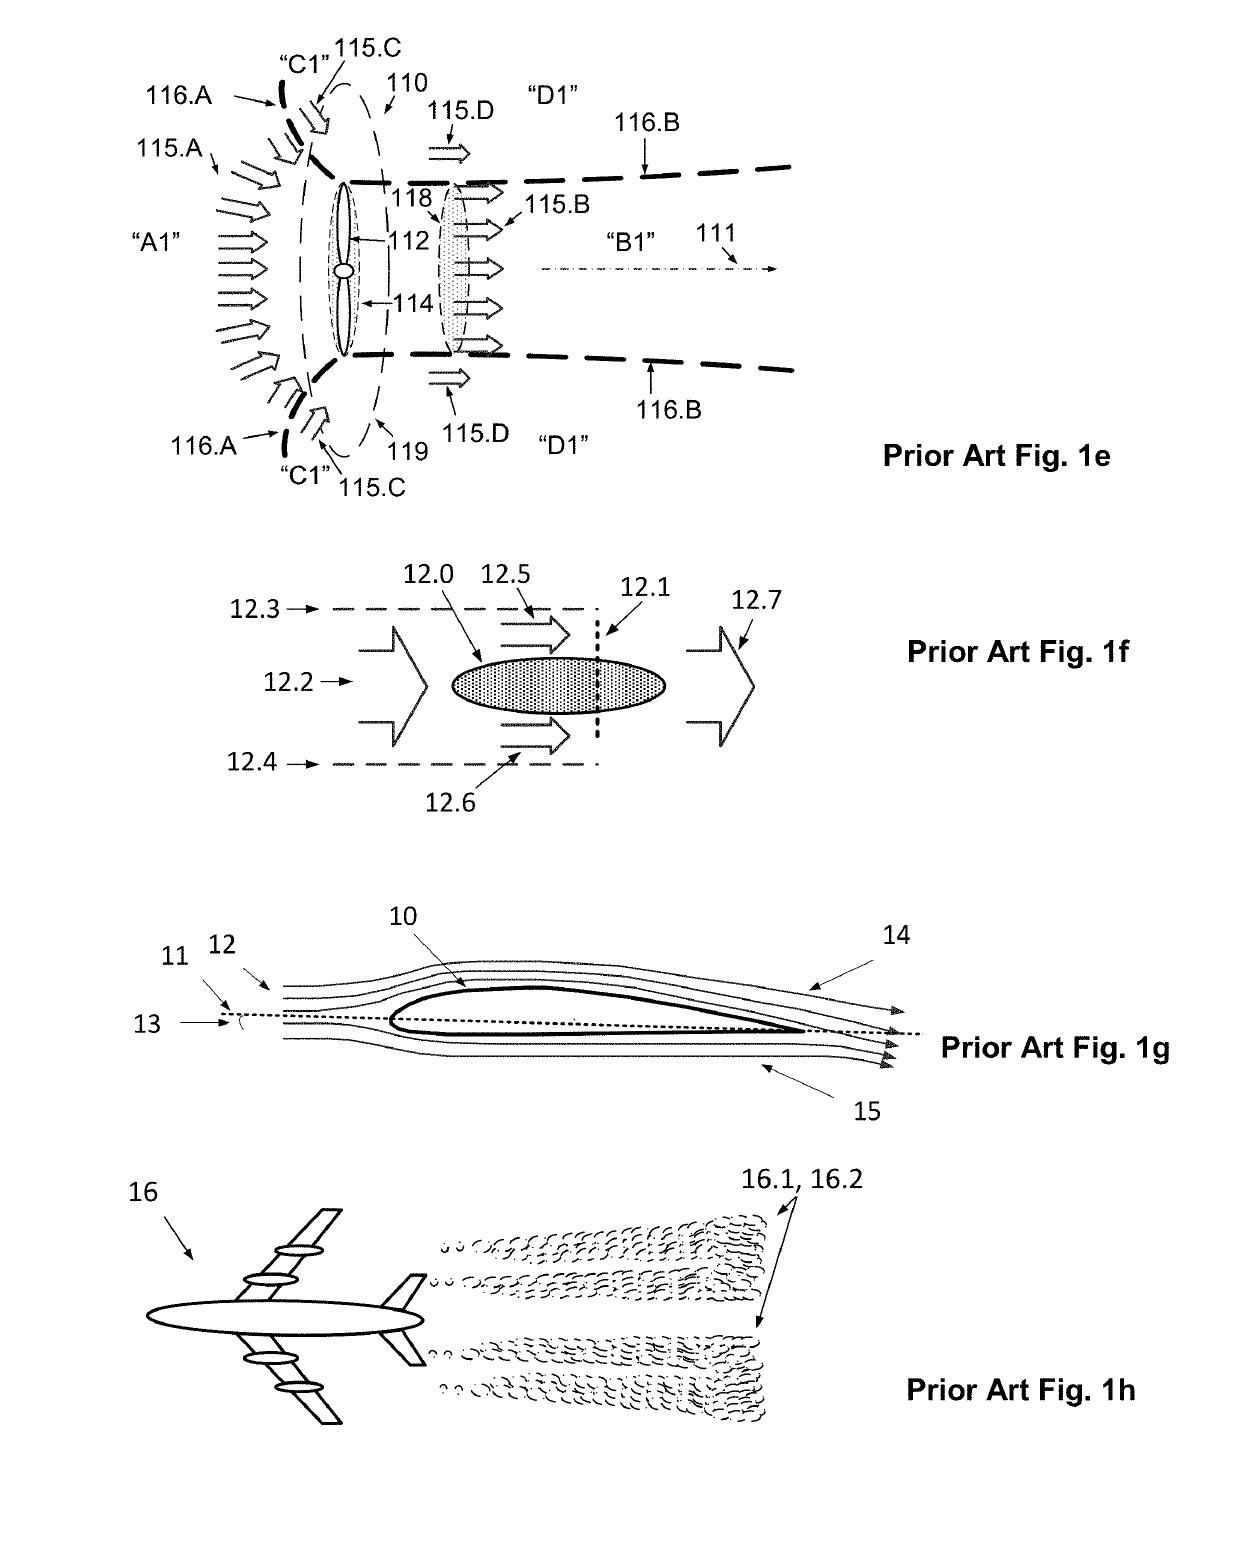 Generalized Jet-Effect and Enhanced Devices